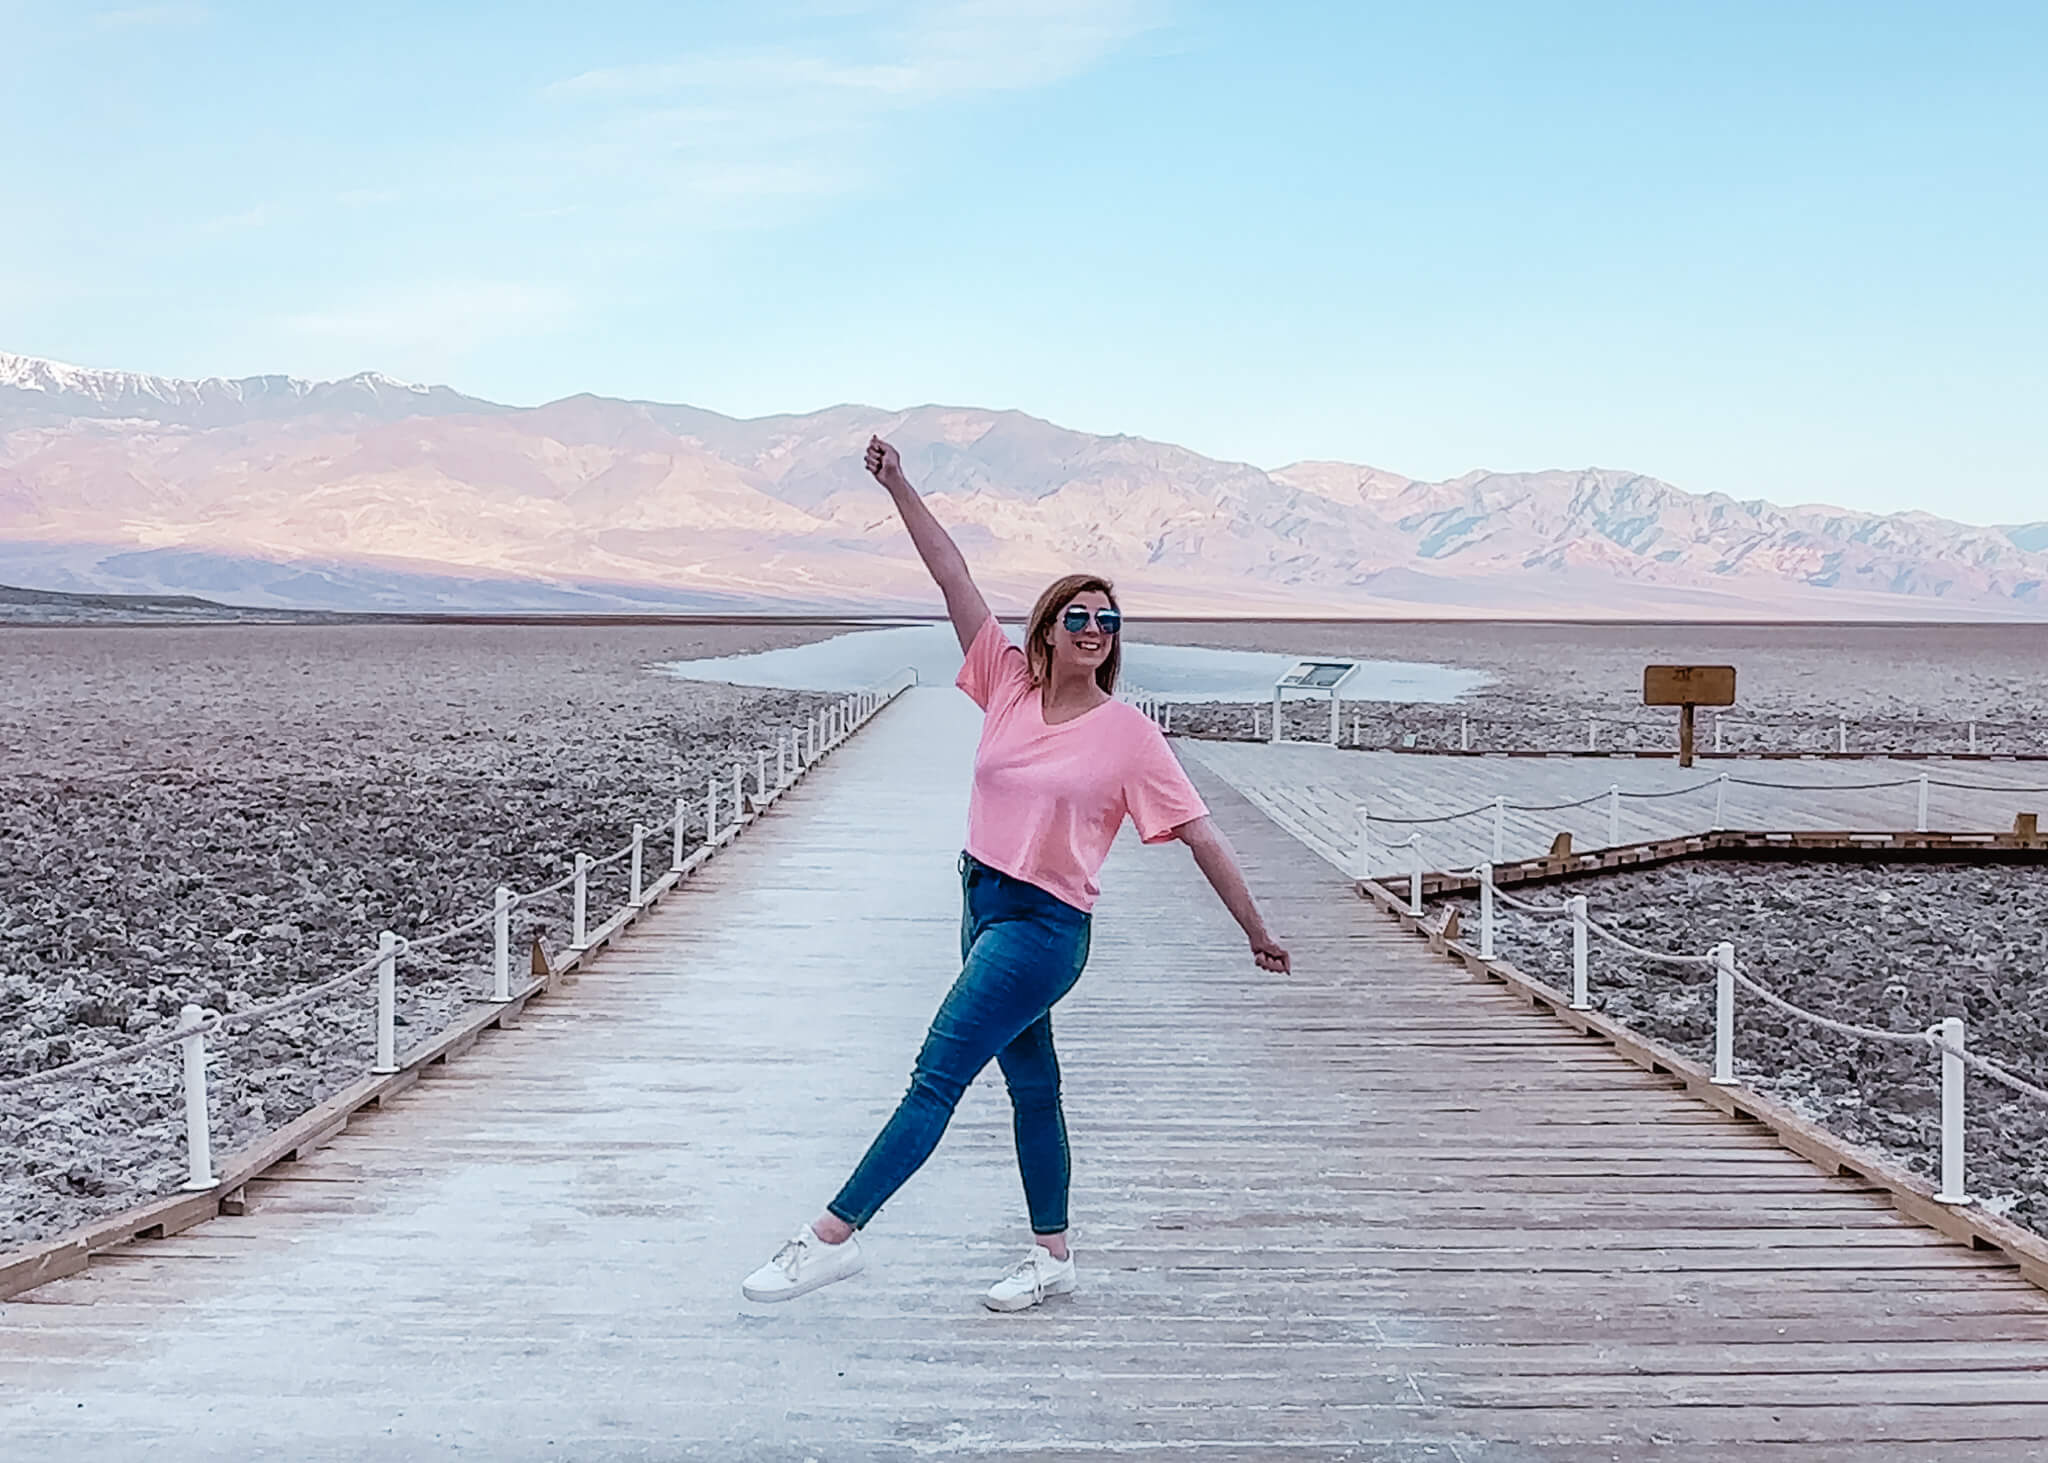 3 Days in Death Valley National Park